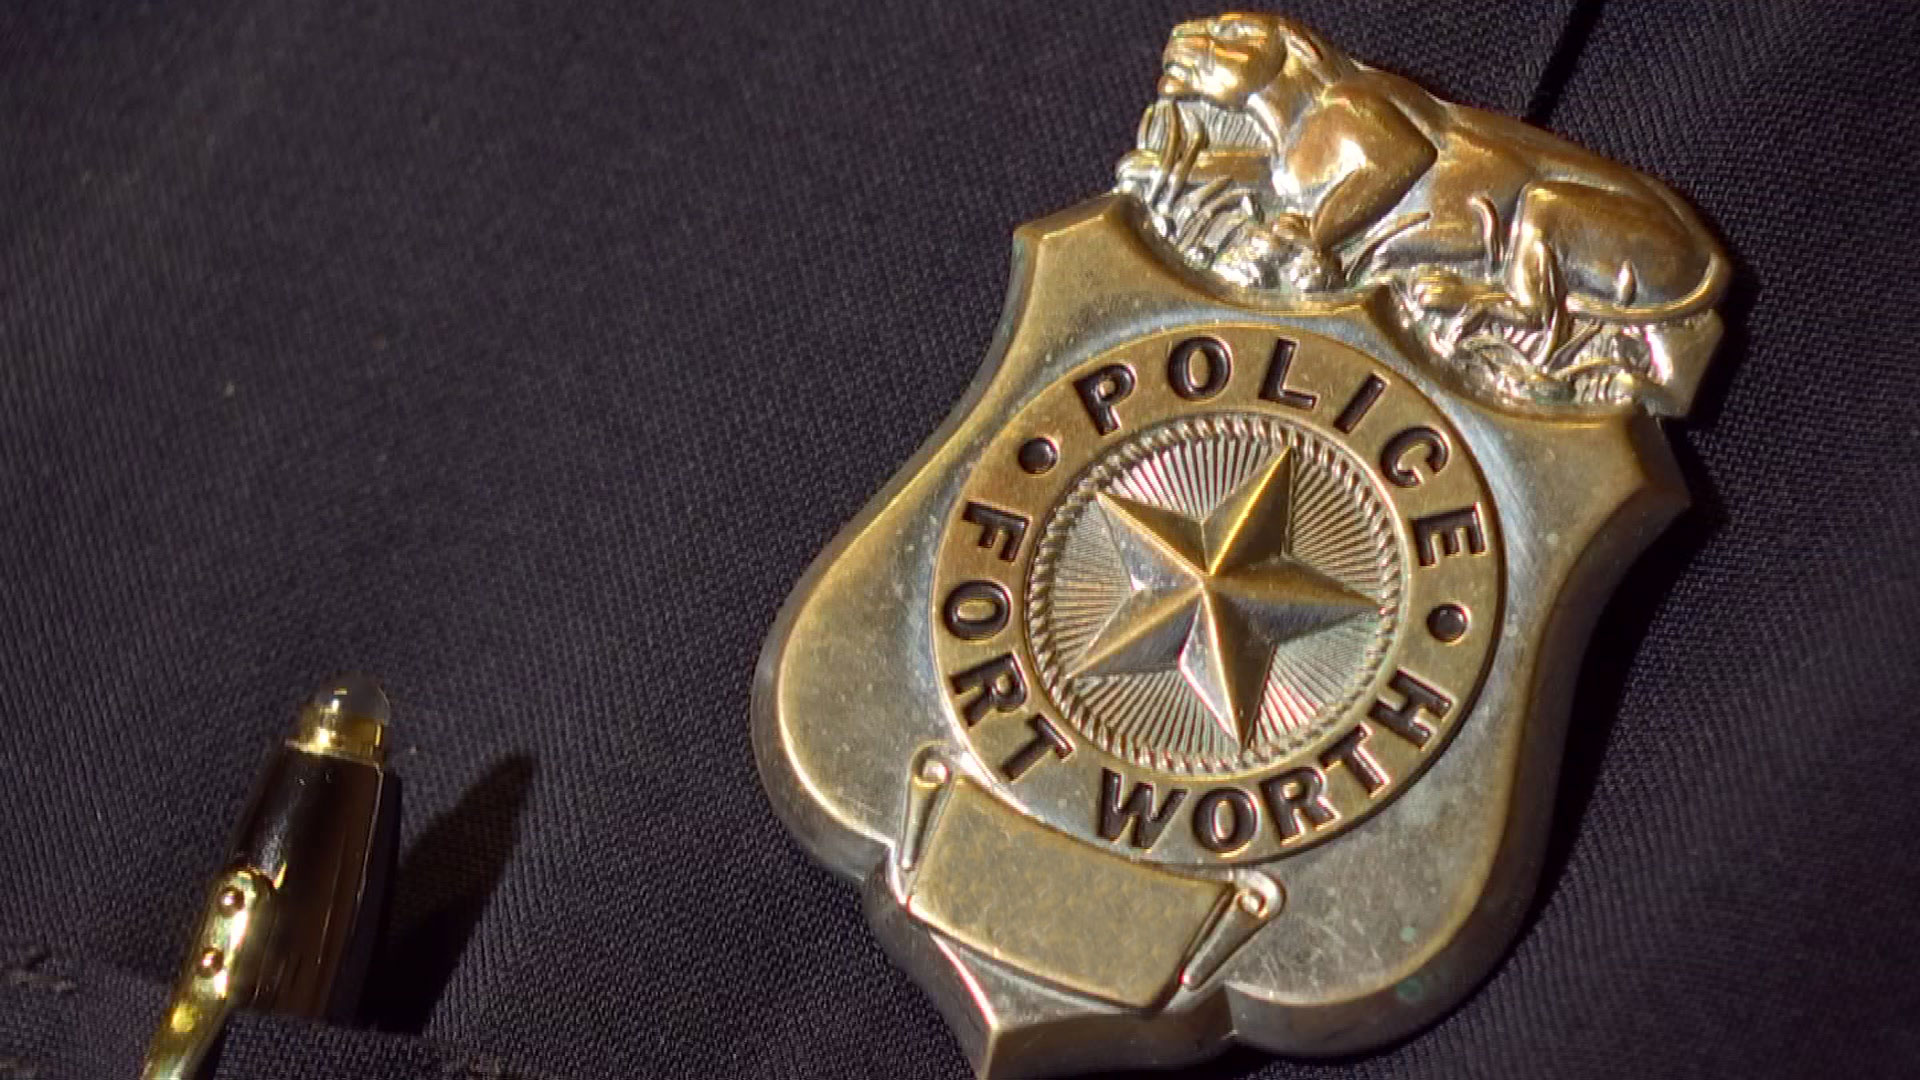 Fort Worth officer fired after department says he shoved a man
‘unnecessarily several times'